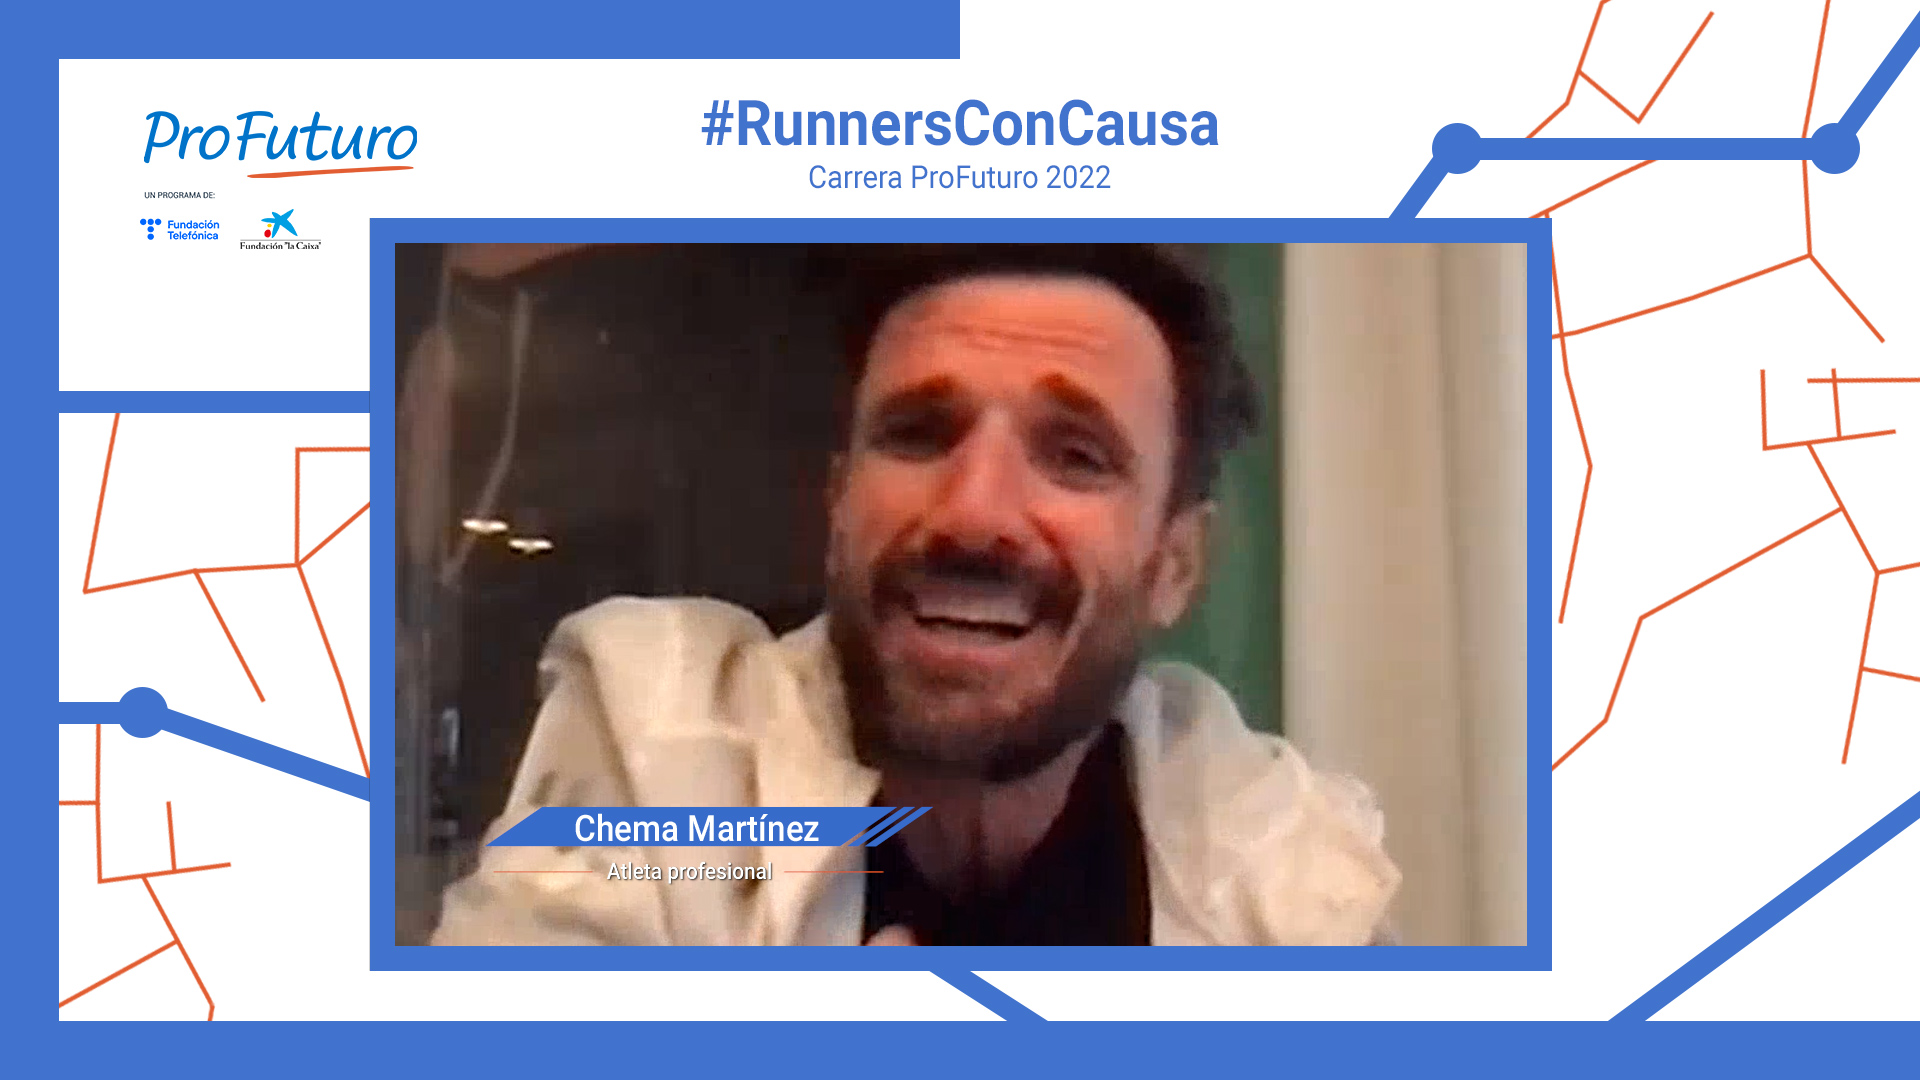 #RunnersConCausa has arrived together with Chema Martínez